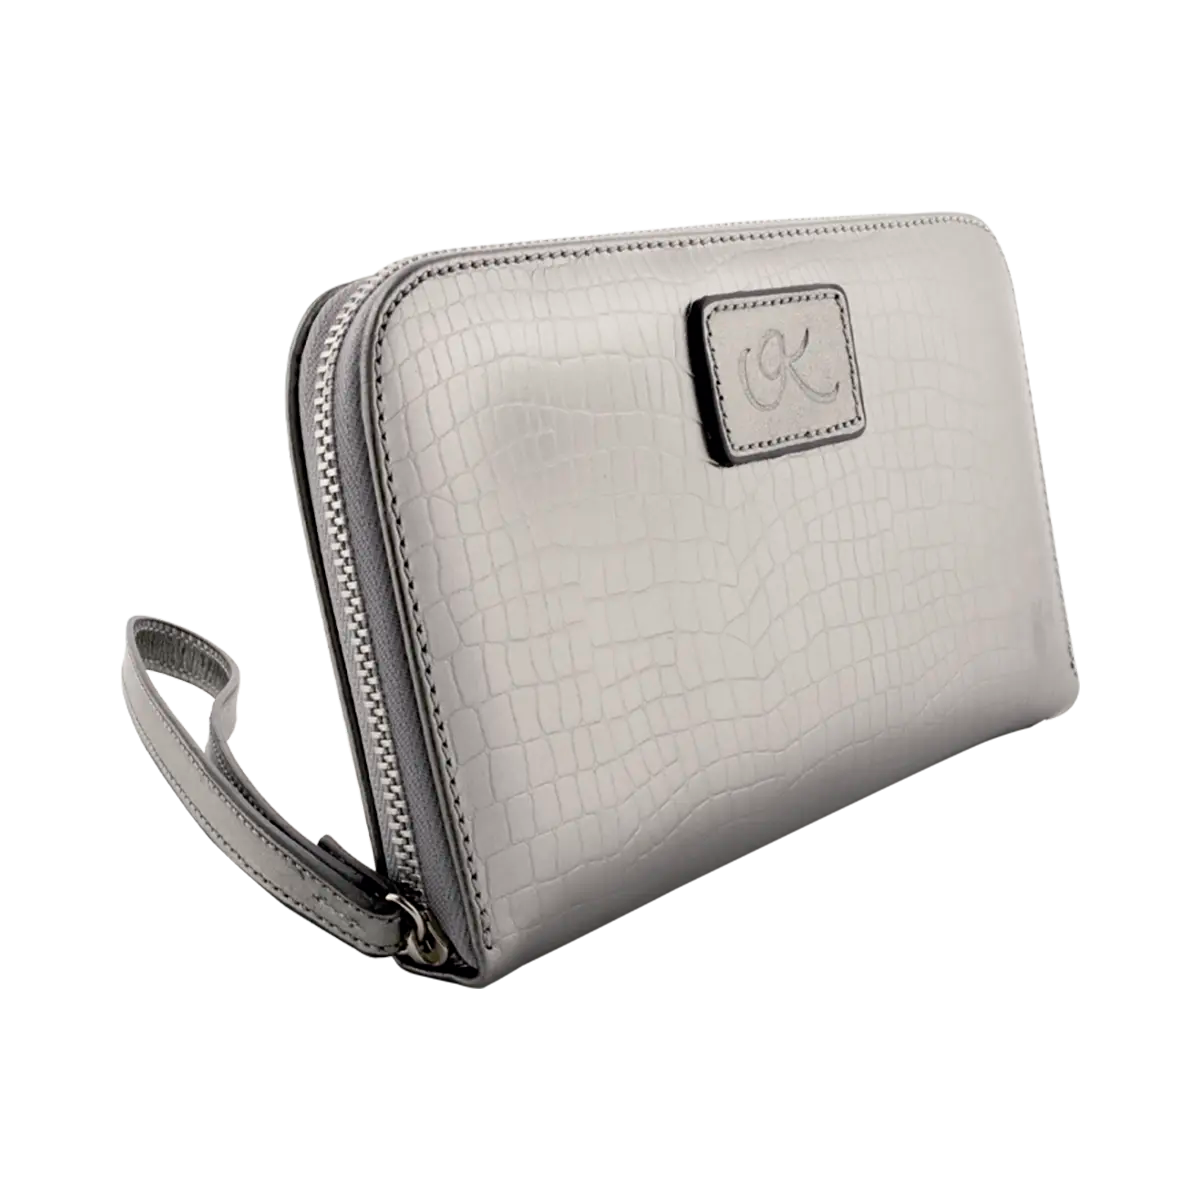 largesilver leather wallet with hand strap. Fashion Accessories for women shop in San Diego, CA.